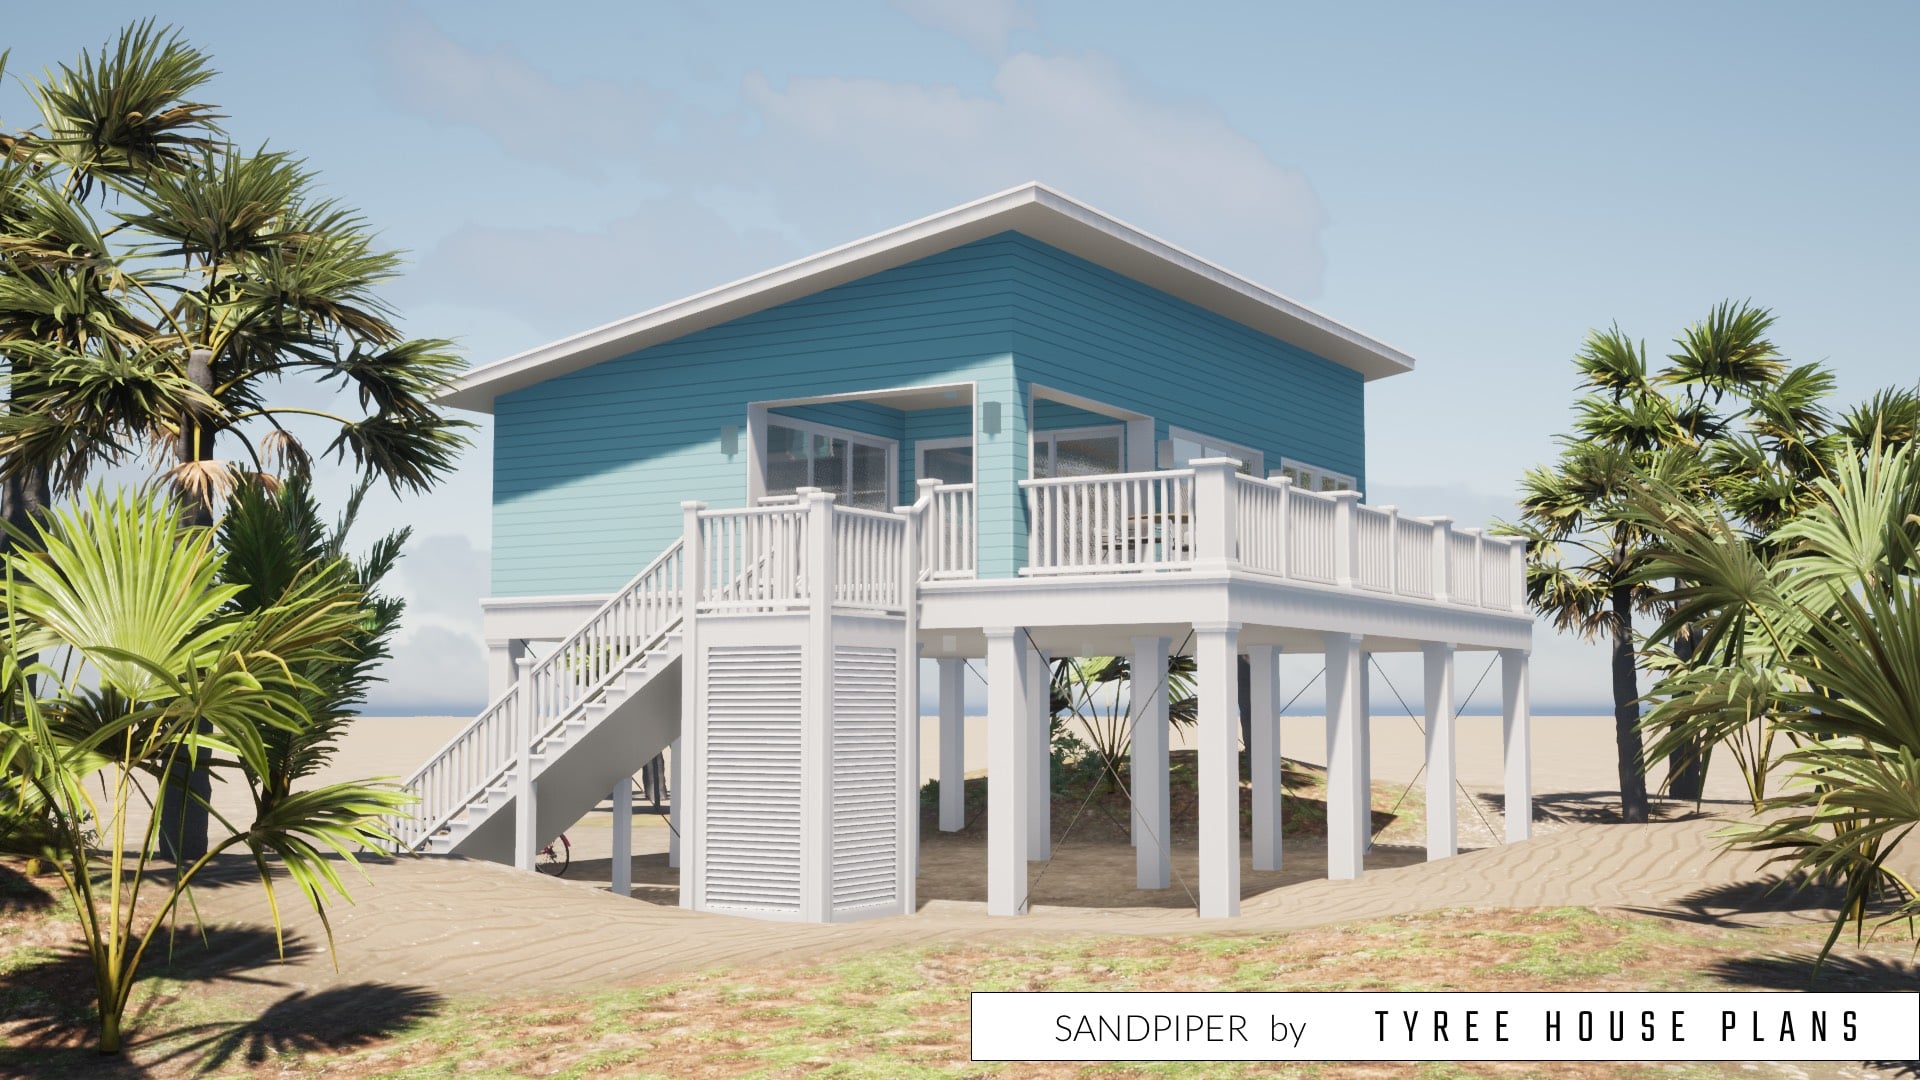 Sandpiper House Plan by Tyree House Plans